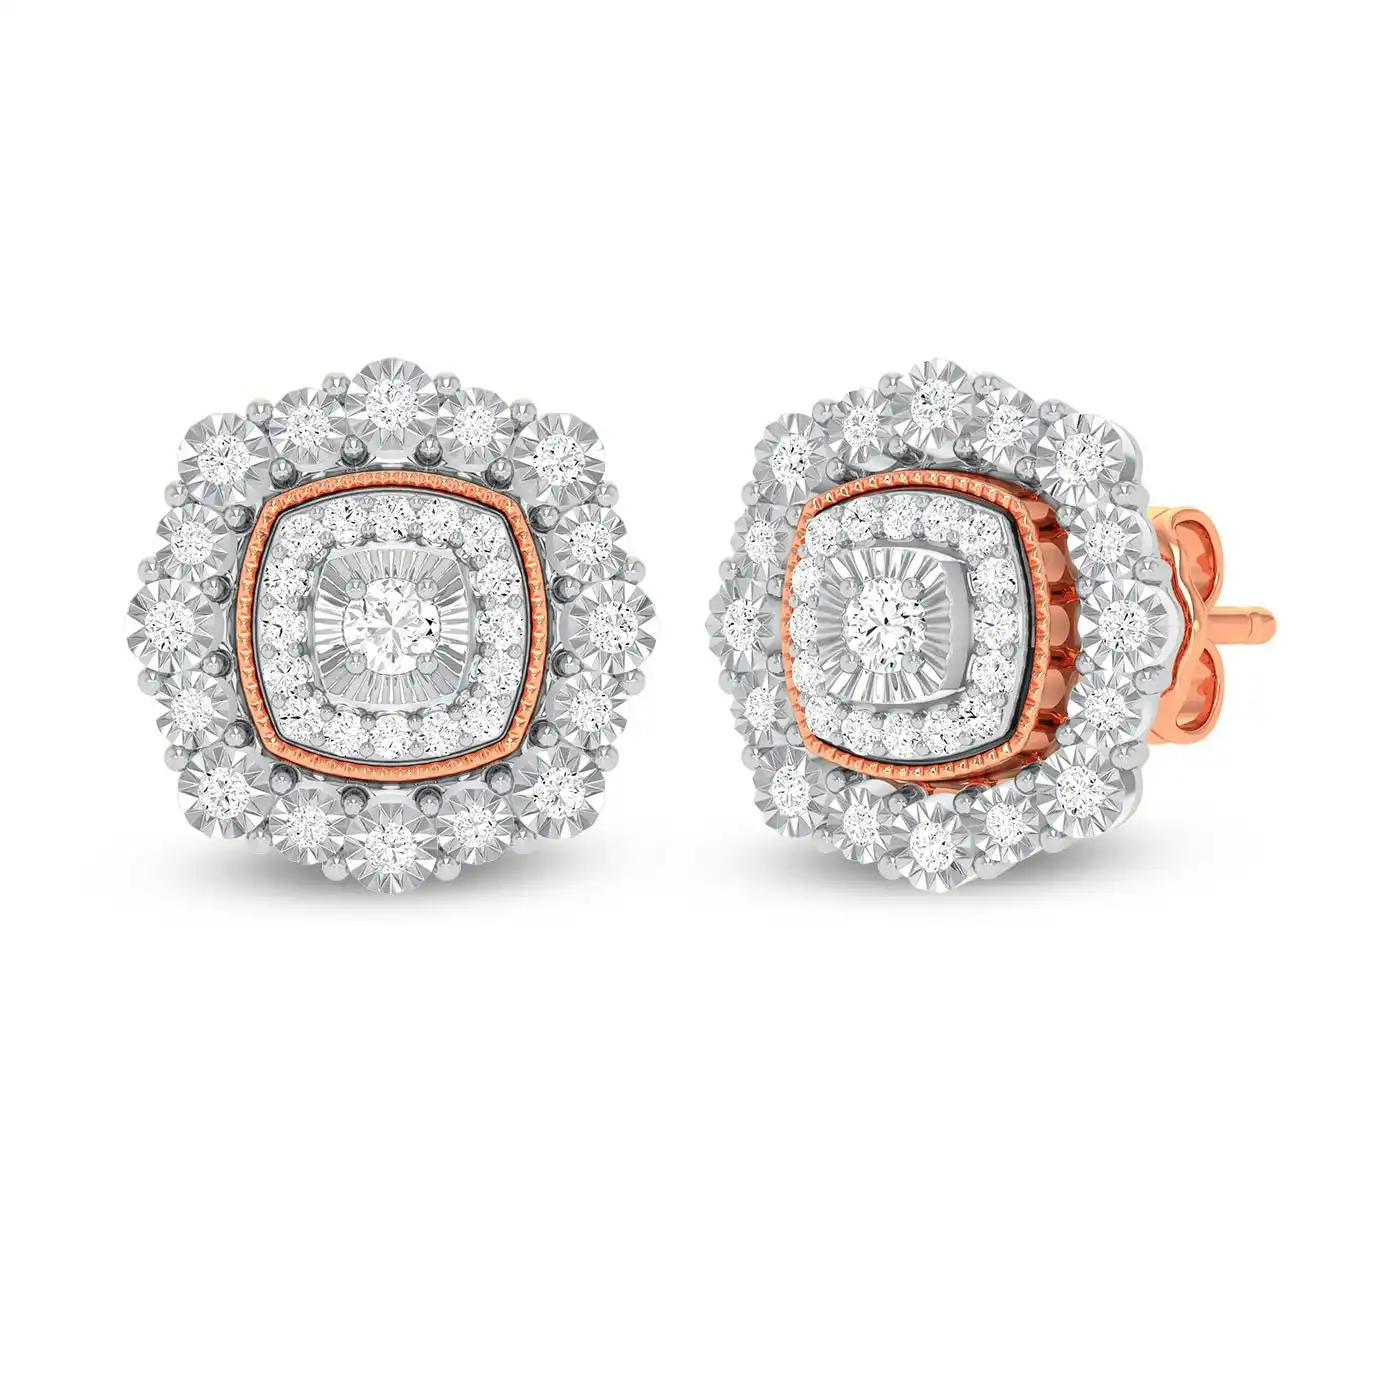 Miracle Little Halo Earrings with 0.15ct of Diamonds in 9ct Rose Gold